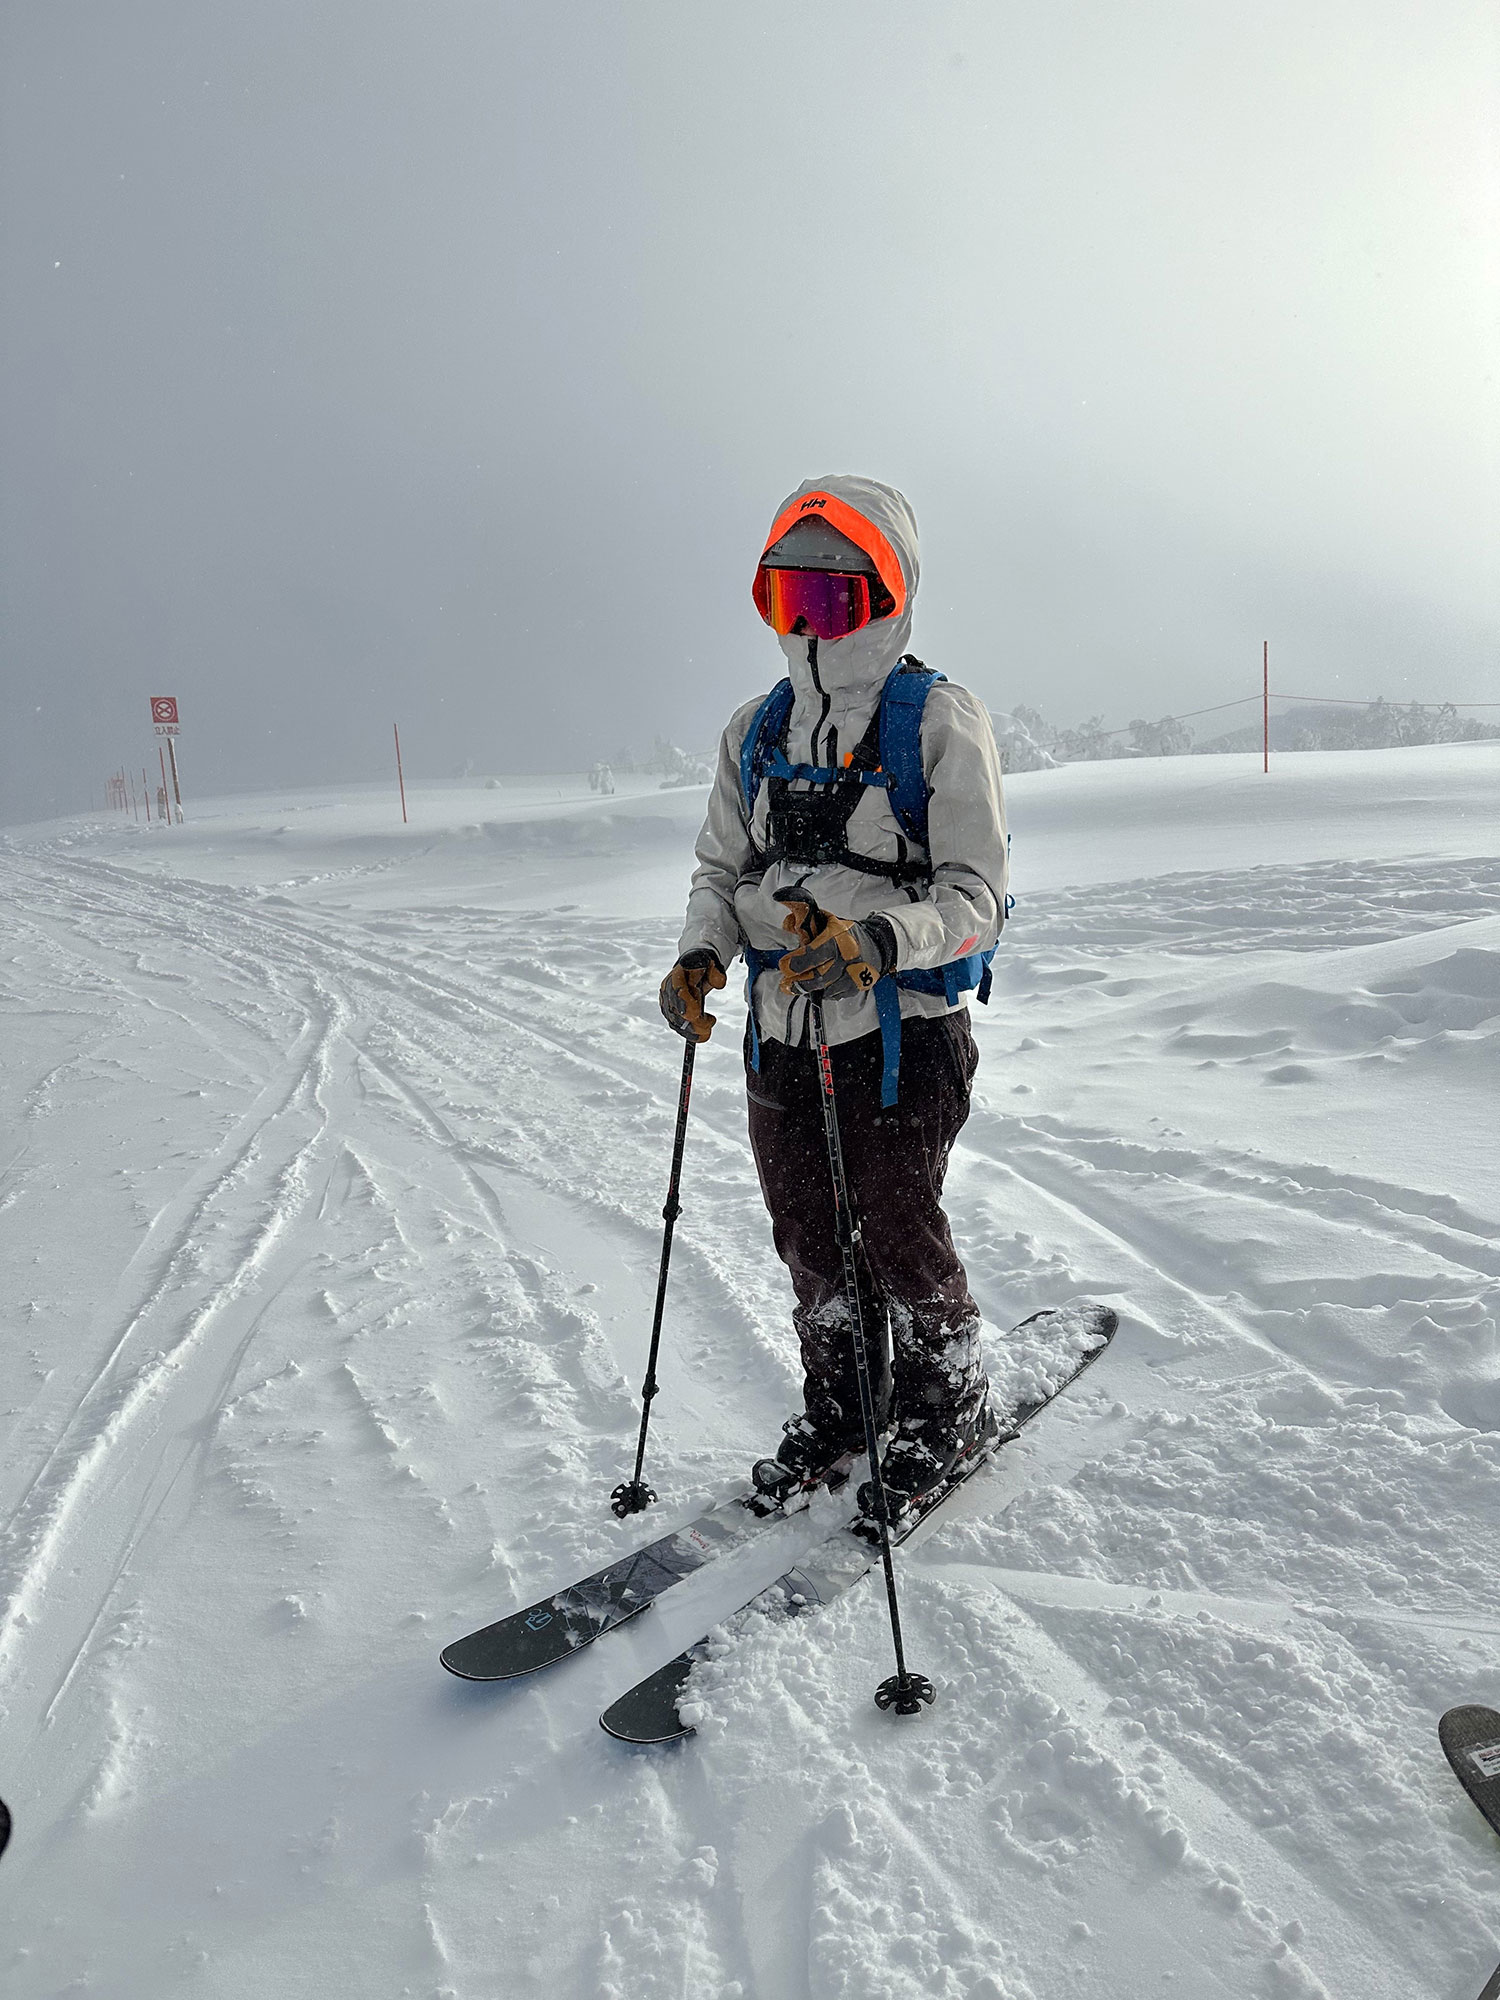 A skier wearing orange ZIV snow goggles, holding ski poles, and wearing snowboard boots.